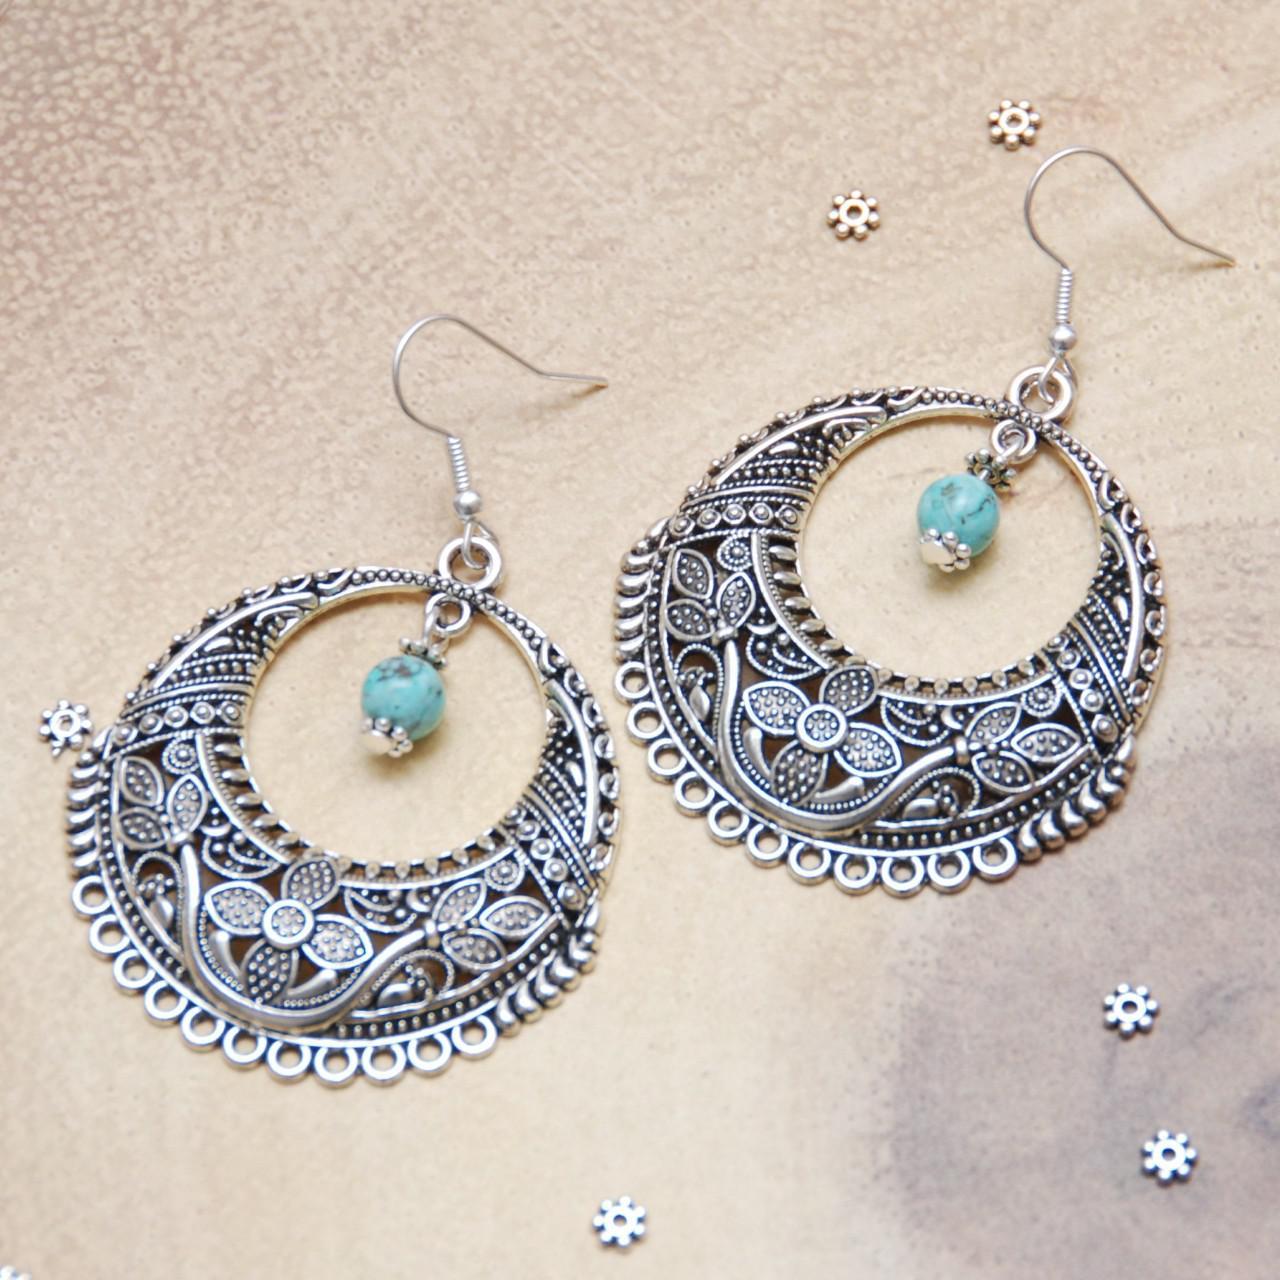 Product Image 1 - Indian Statement Large Earrings 
Turquoise